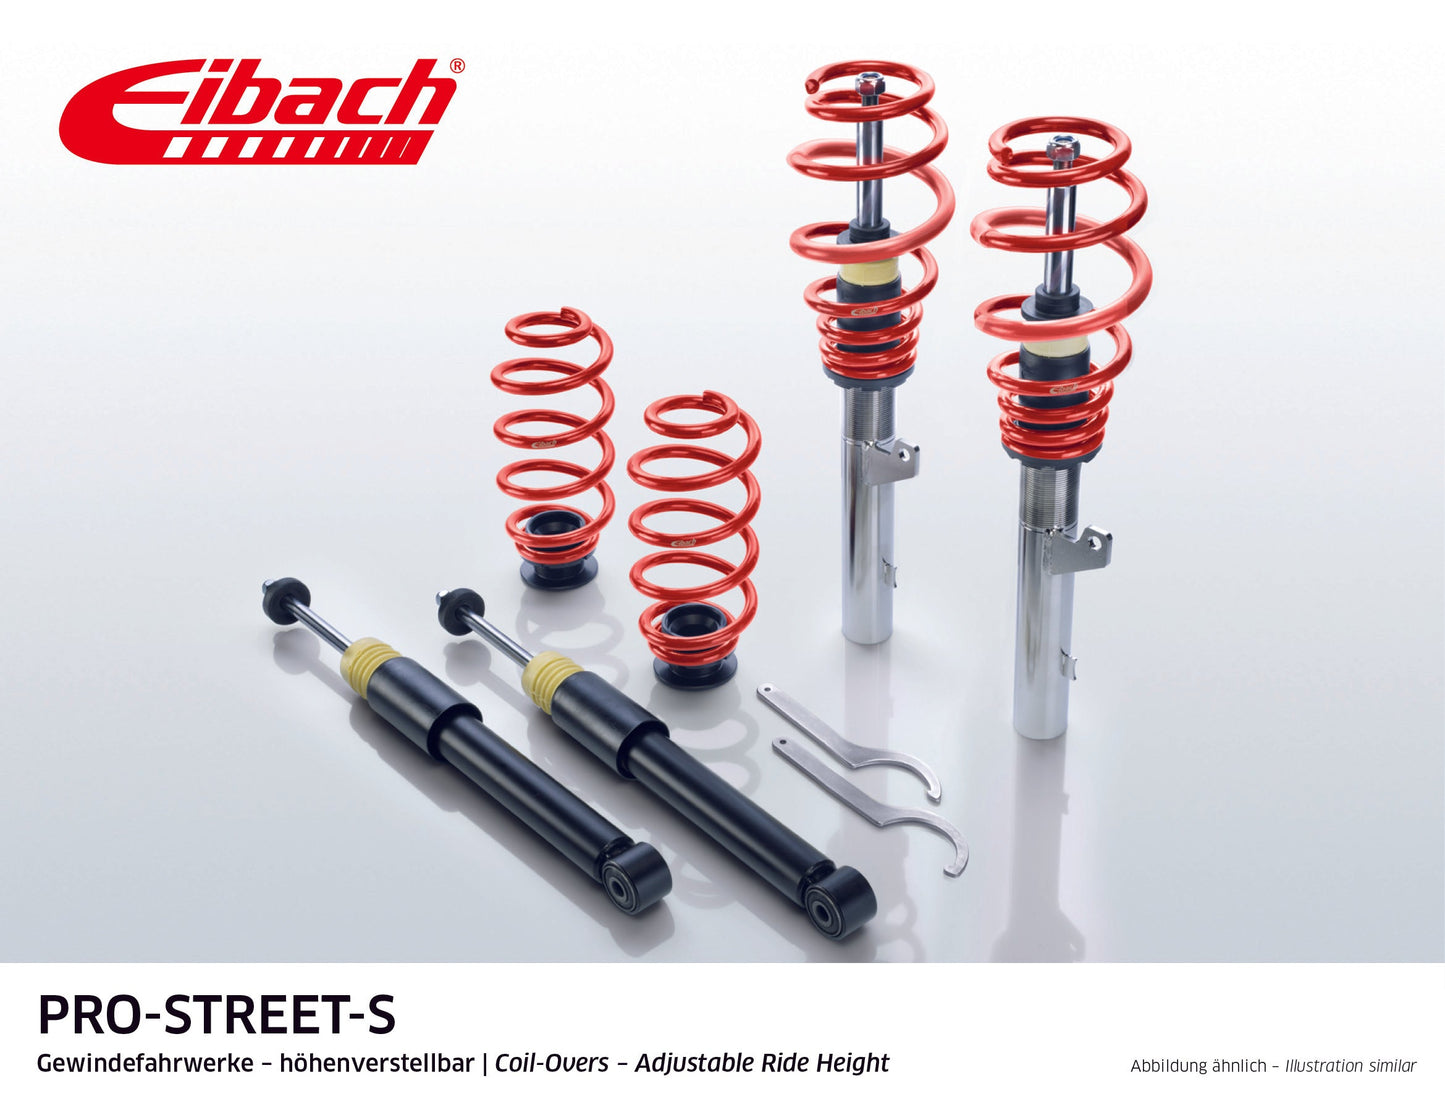 Eibach Pro-Street Coilover (PSS65-20-022-01-22) at £1365.07